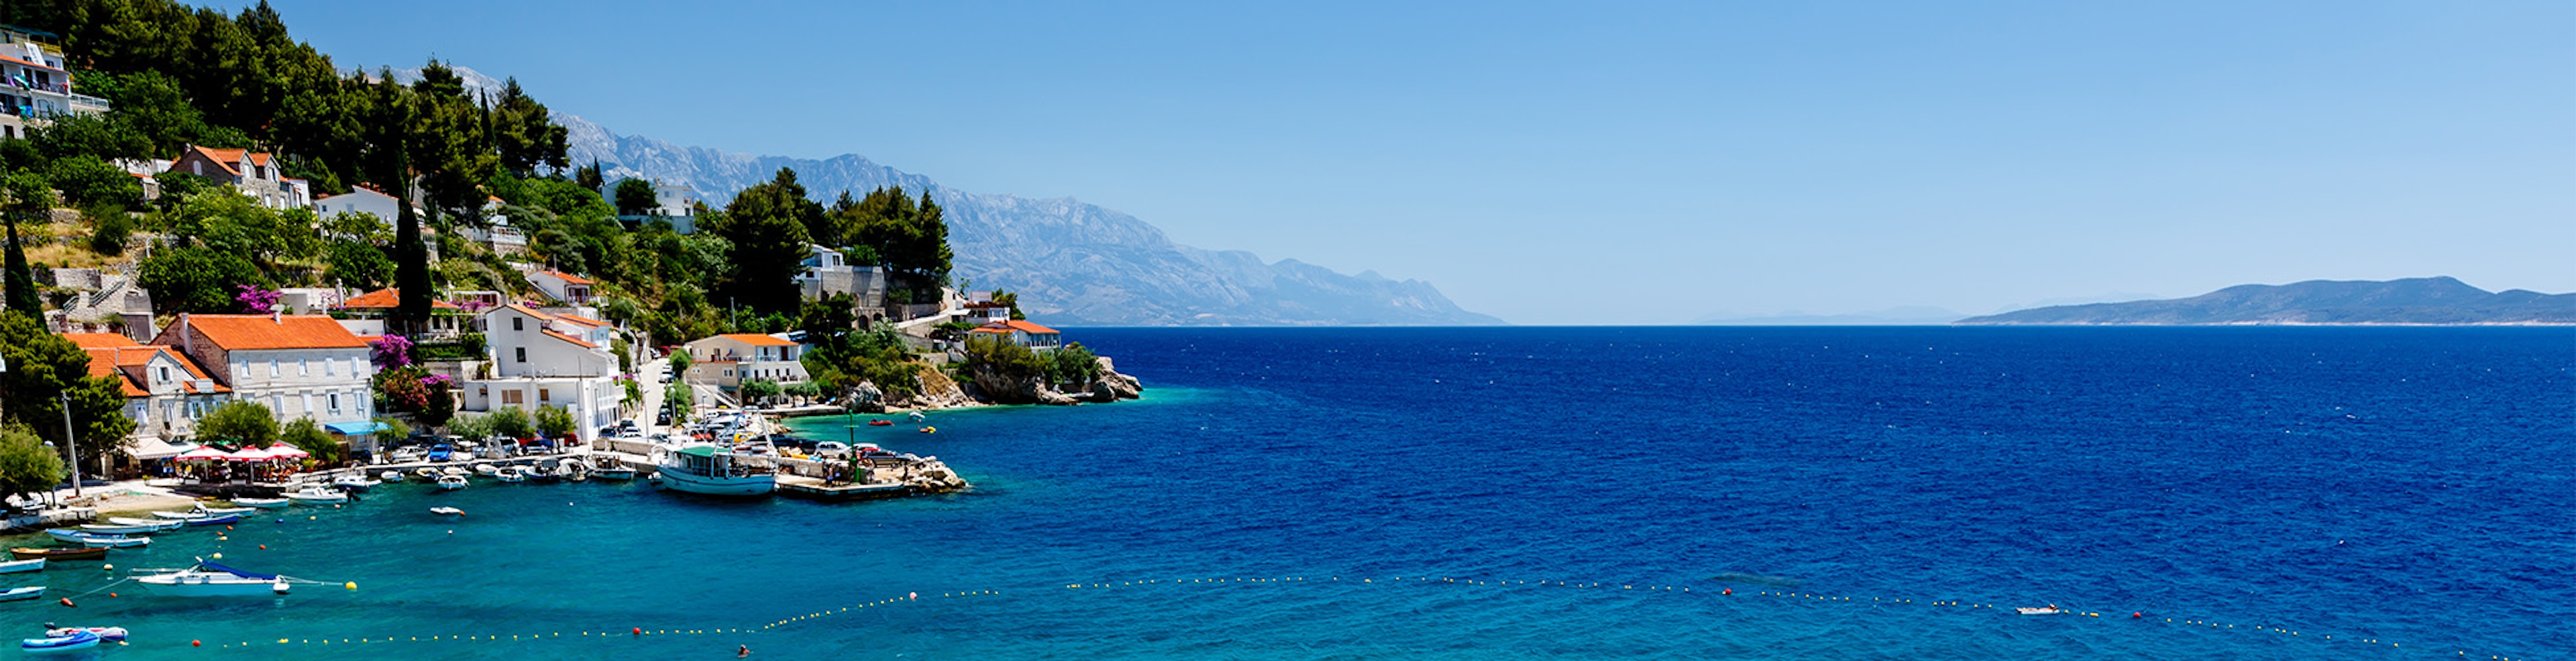 The turquoise waters off the shore of a beautiful Adriatic beach near Split in Croatia